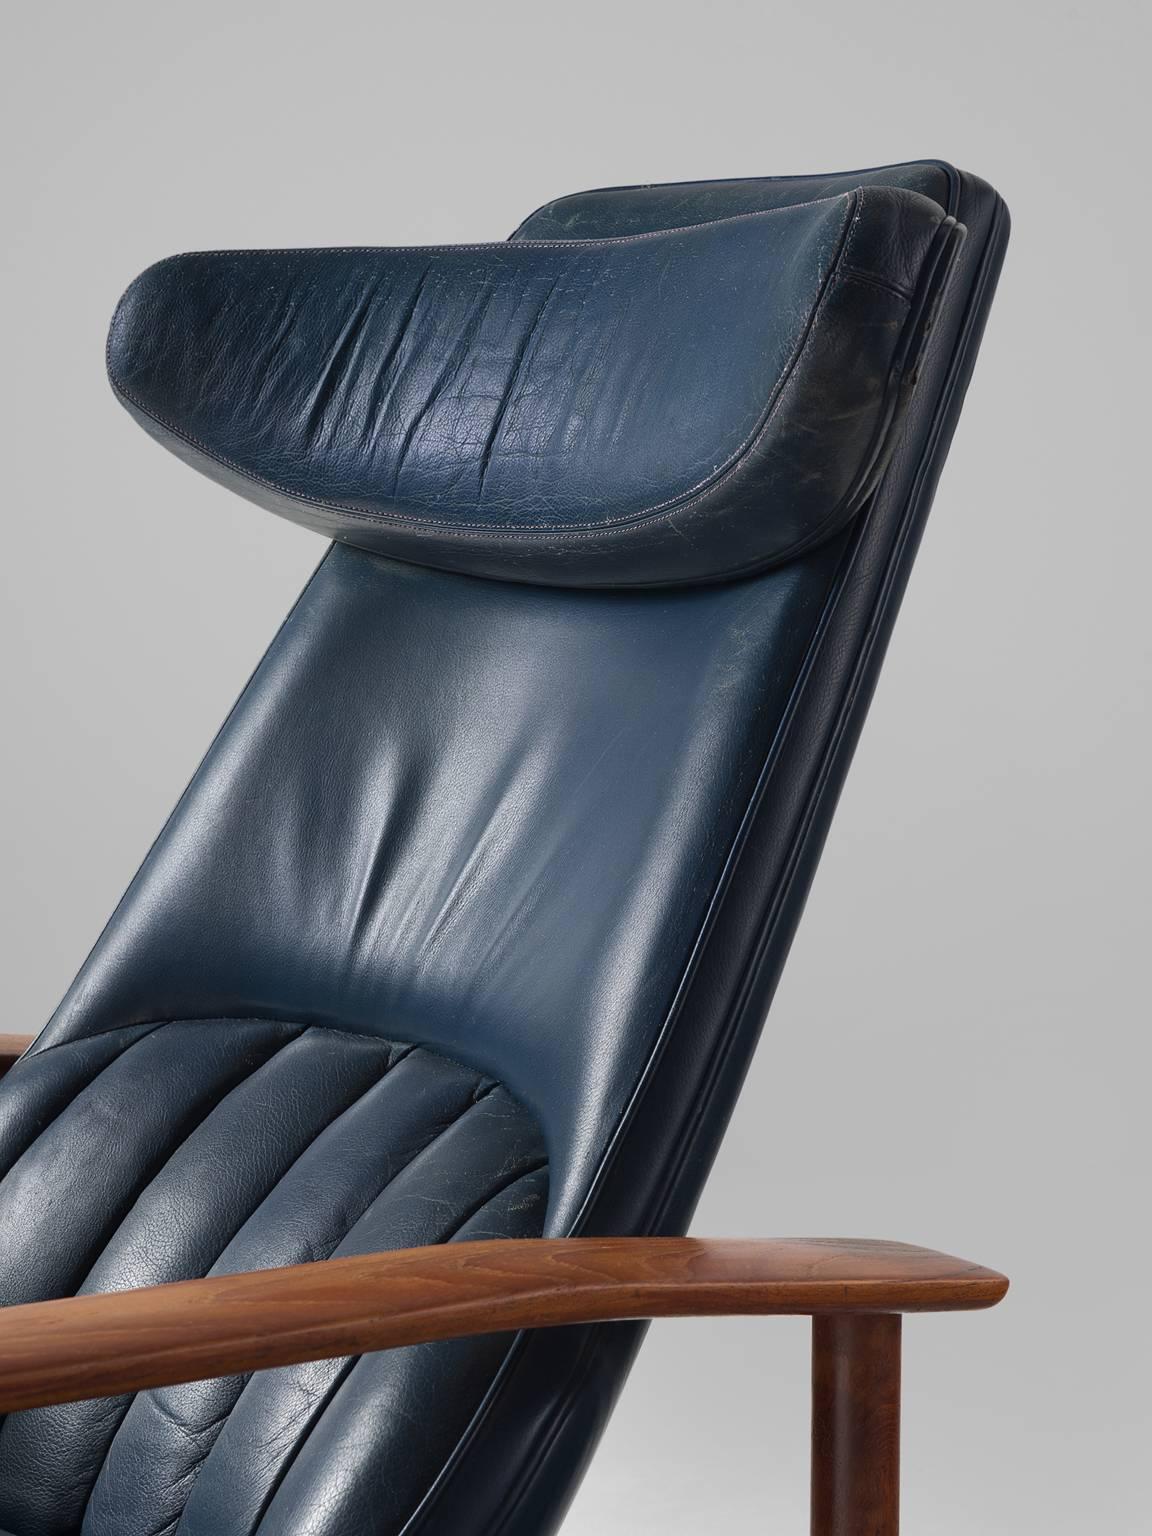 Leather Lounge Chair by Sven Ivar Dysthe for Dokka Mobler Norway